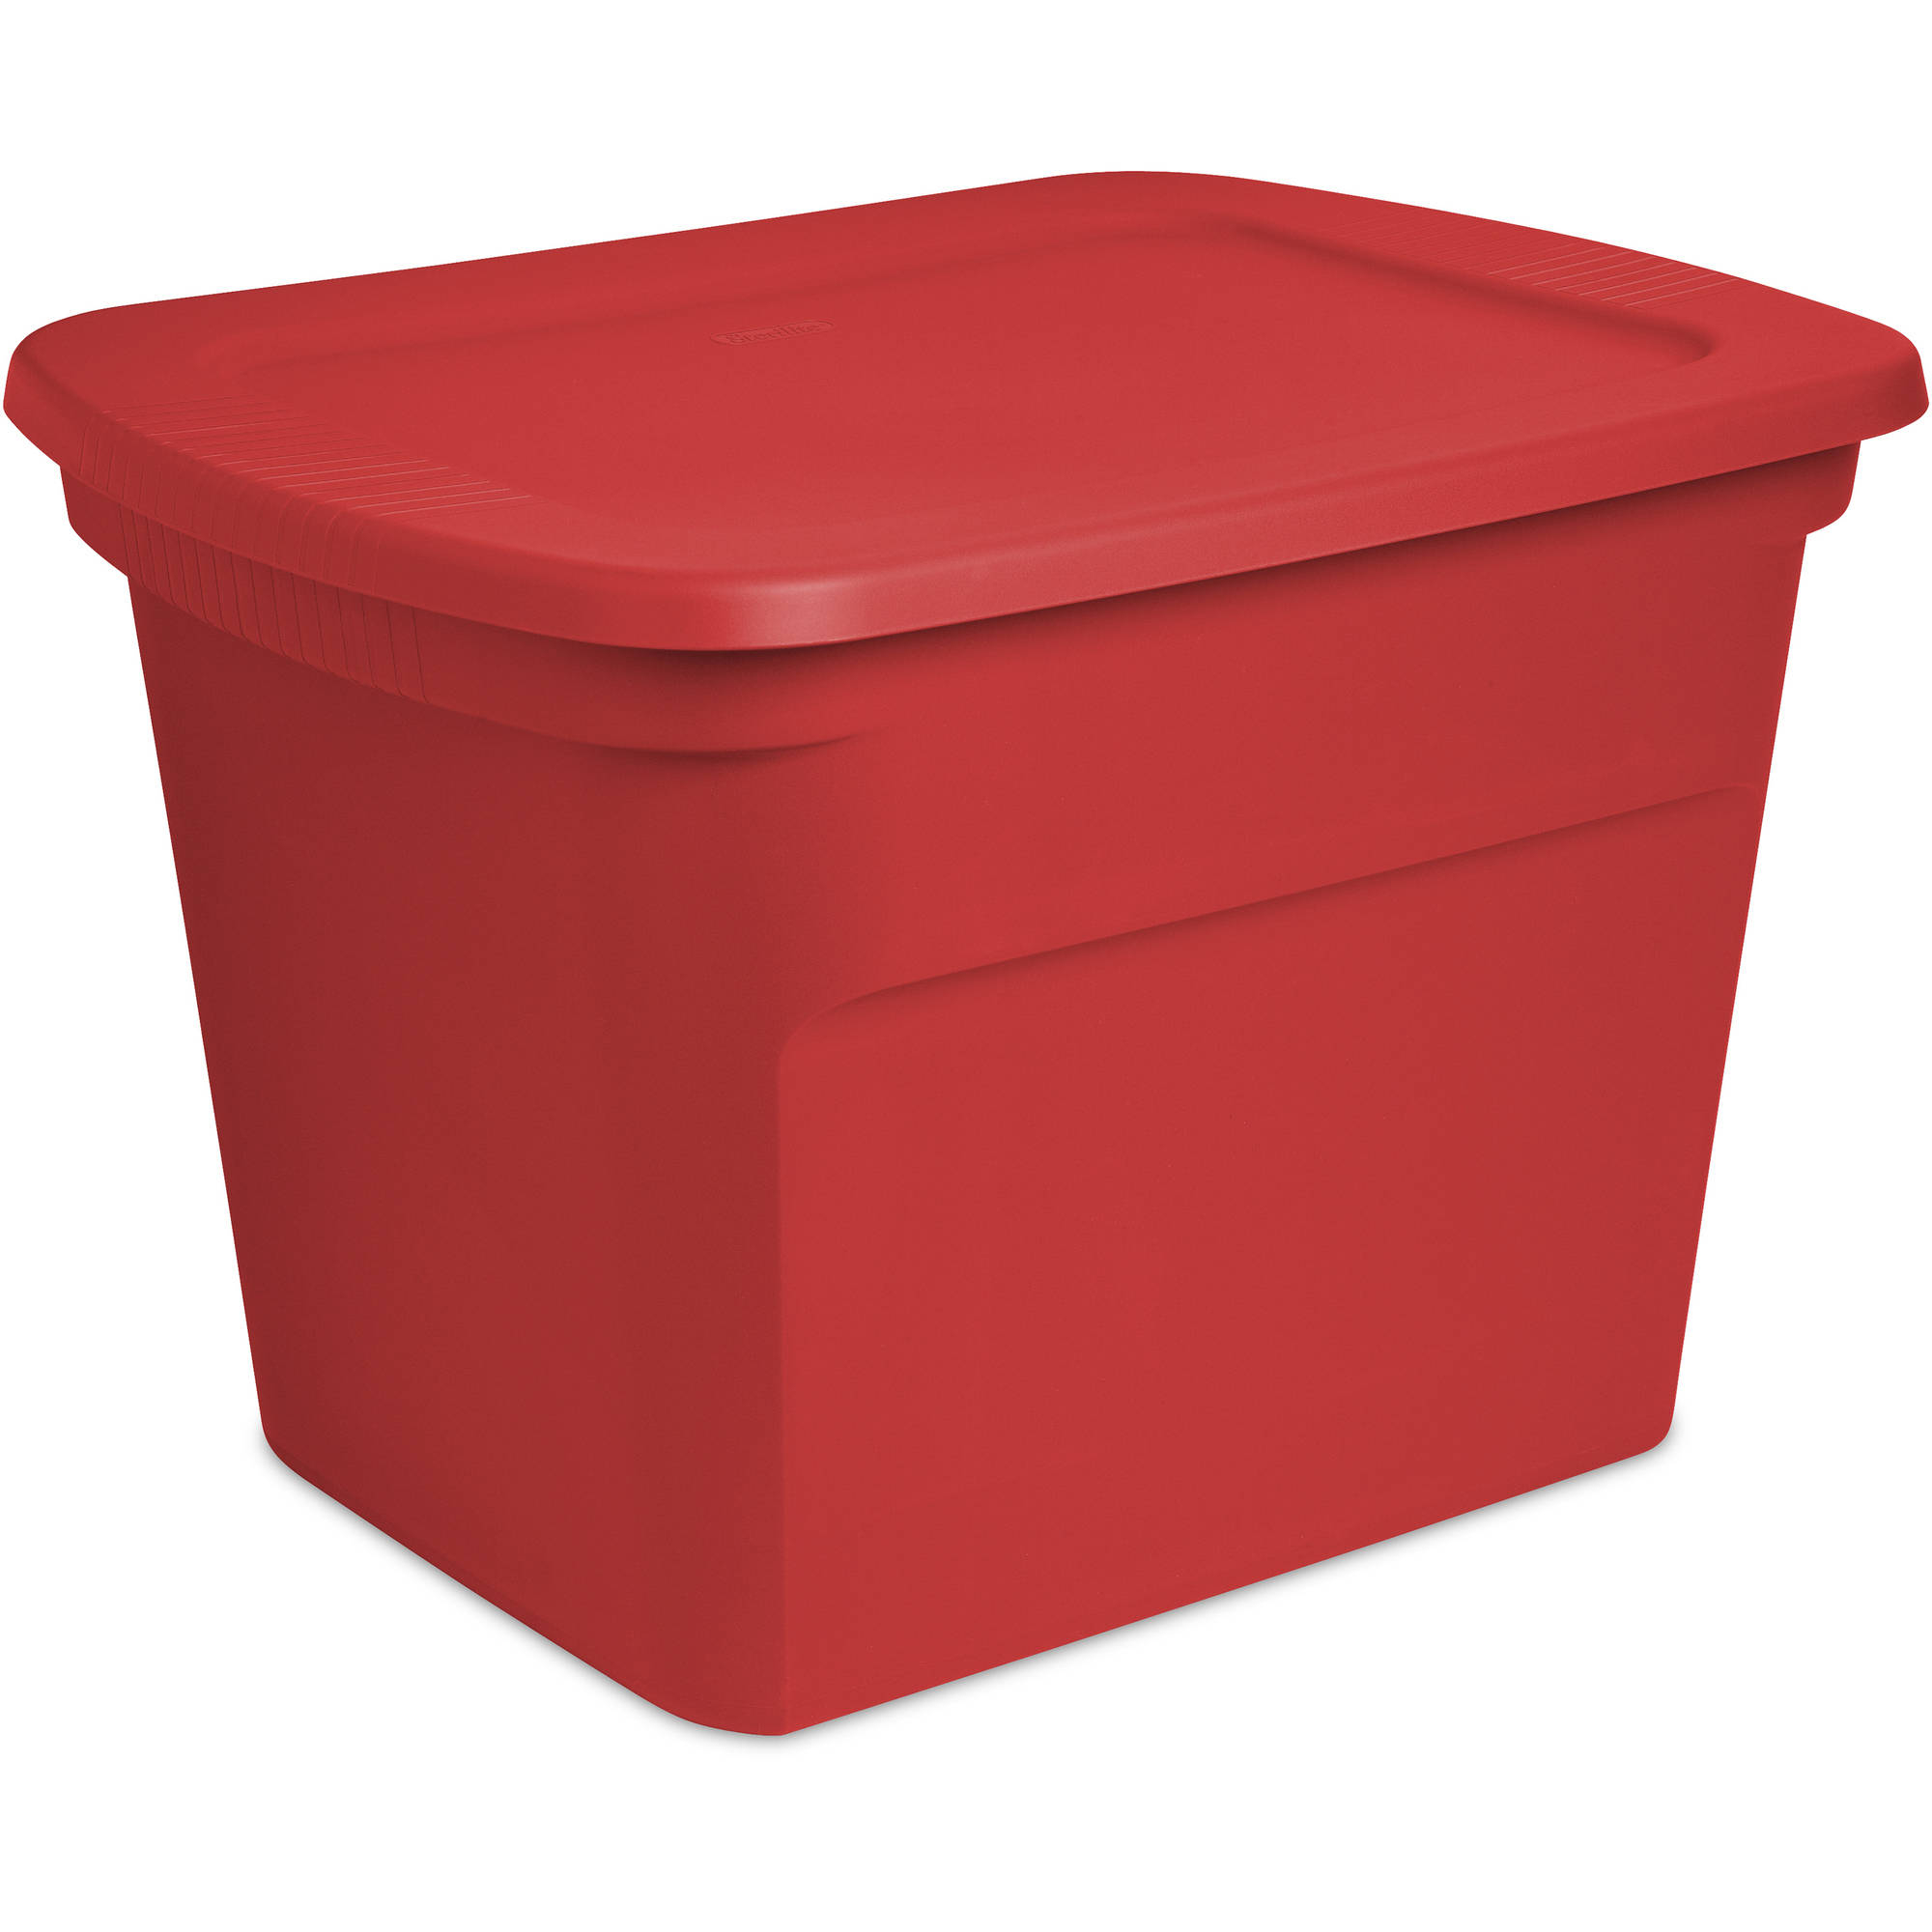 Deck Boxes Stunning Storage Boxes Walmart Storage Boxes Walmart intended for proportions 2000 X 2000